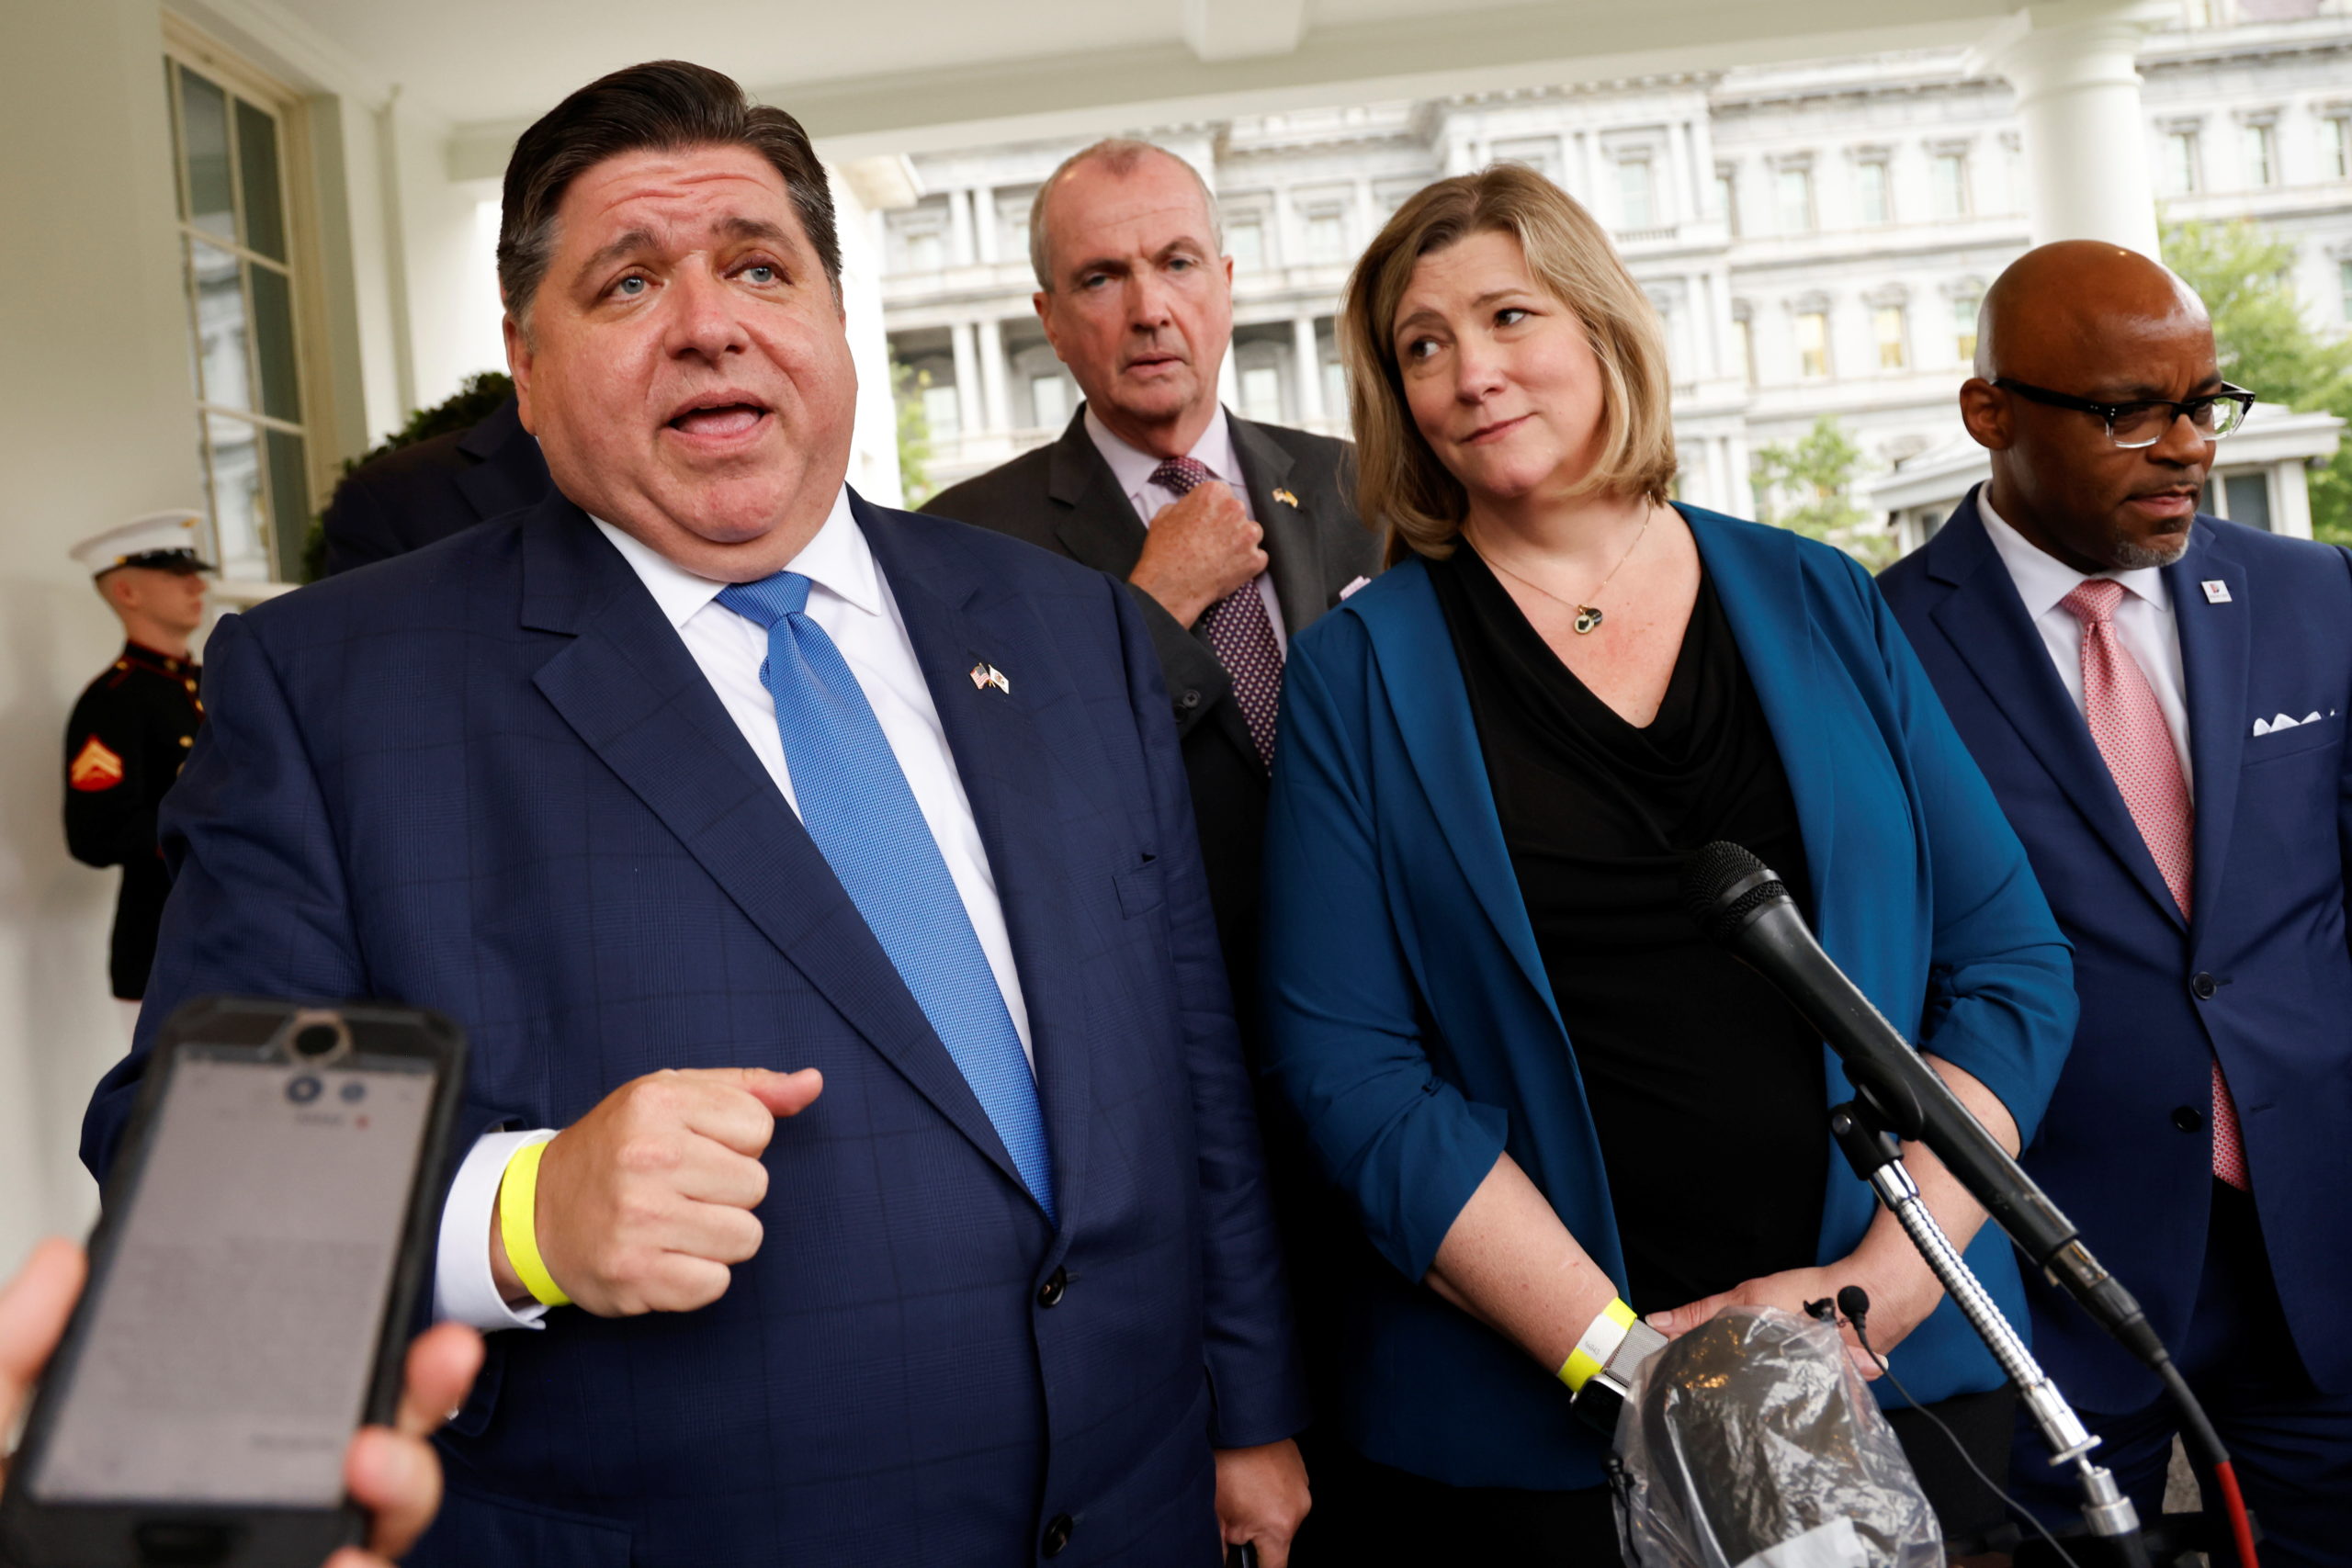 A bipartisan group of mayors and governors, including Illinois Governor J.B. Pritzker, New Jersey Governor Phil Murphy, Dayton Mayor Nan Whaley and Denver Mayor Michael Hancock, speak to reporters after meeeting on infrastructure with U.S. President Joe Biden at the White House in Washington, U.S. July 14, 2021. REUTERS/Jonathan Ernst